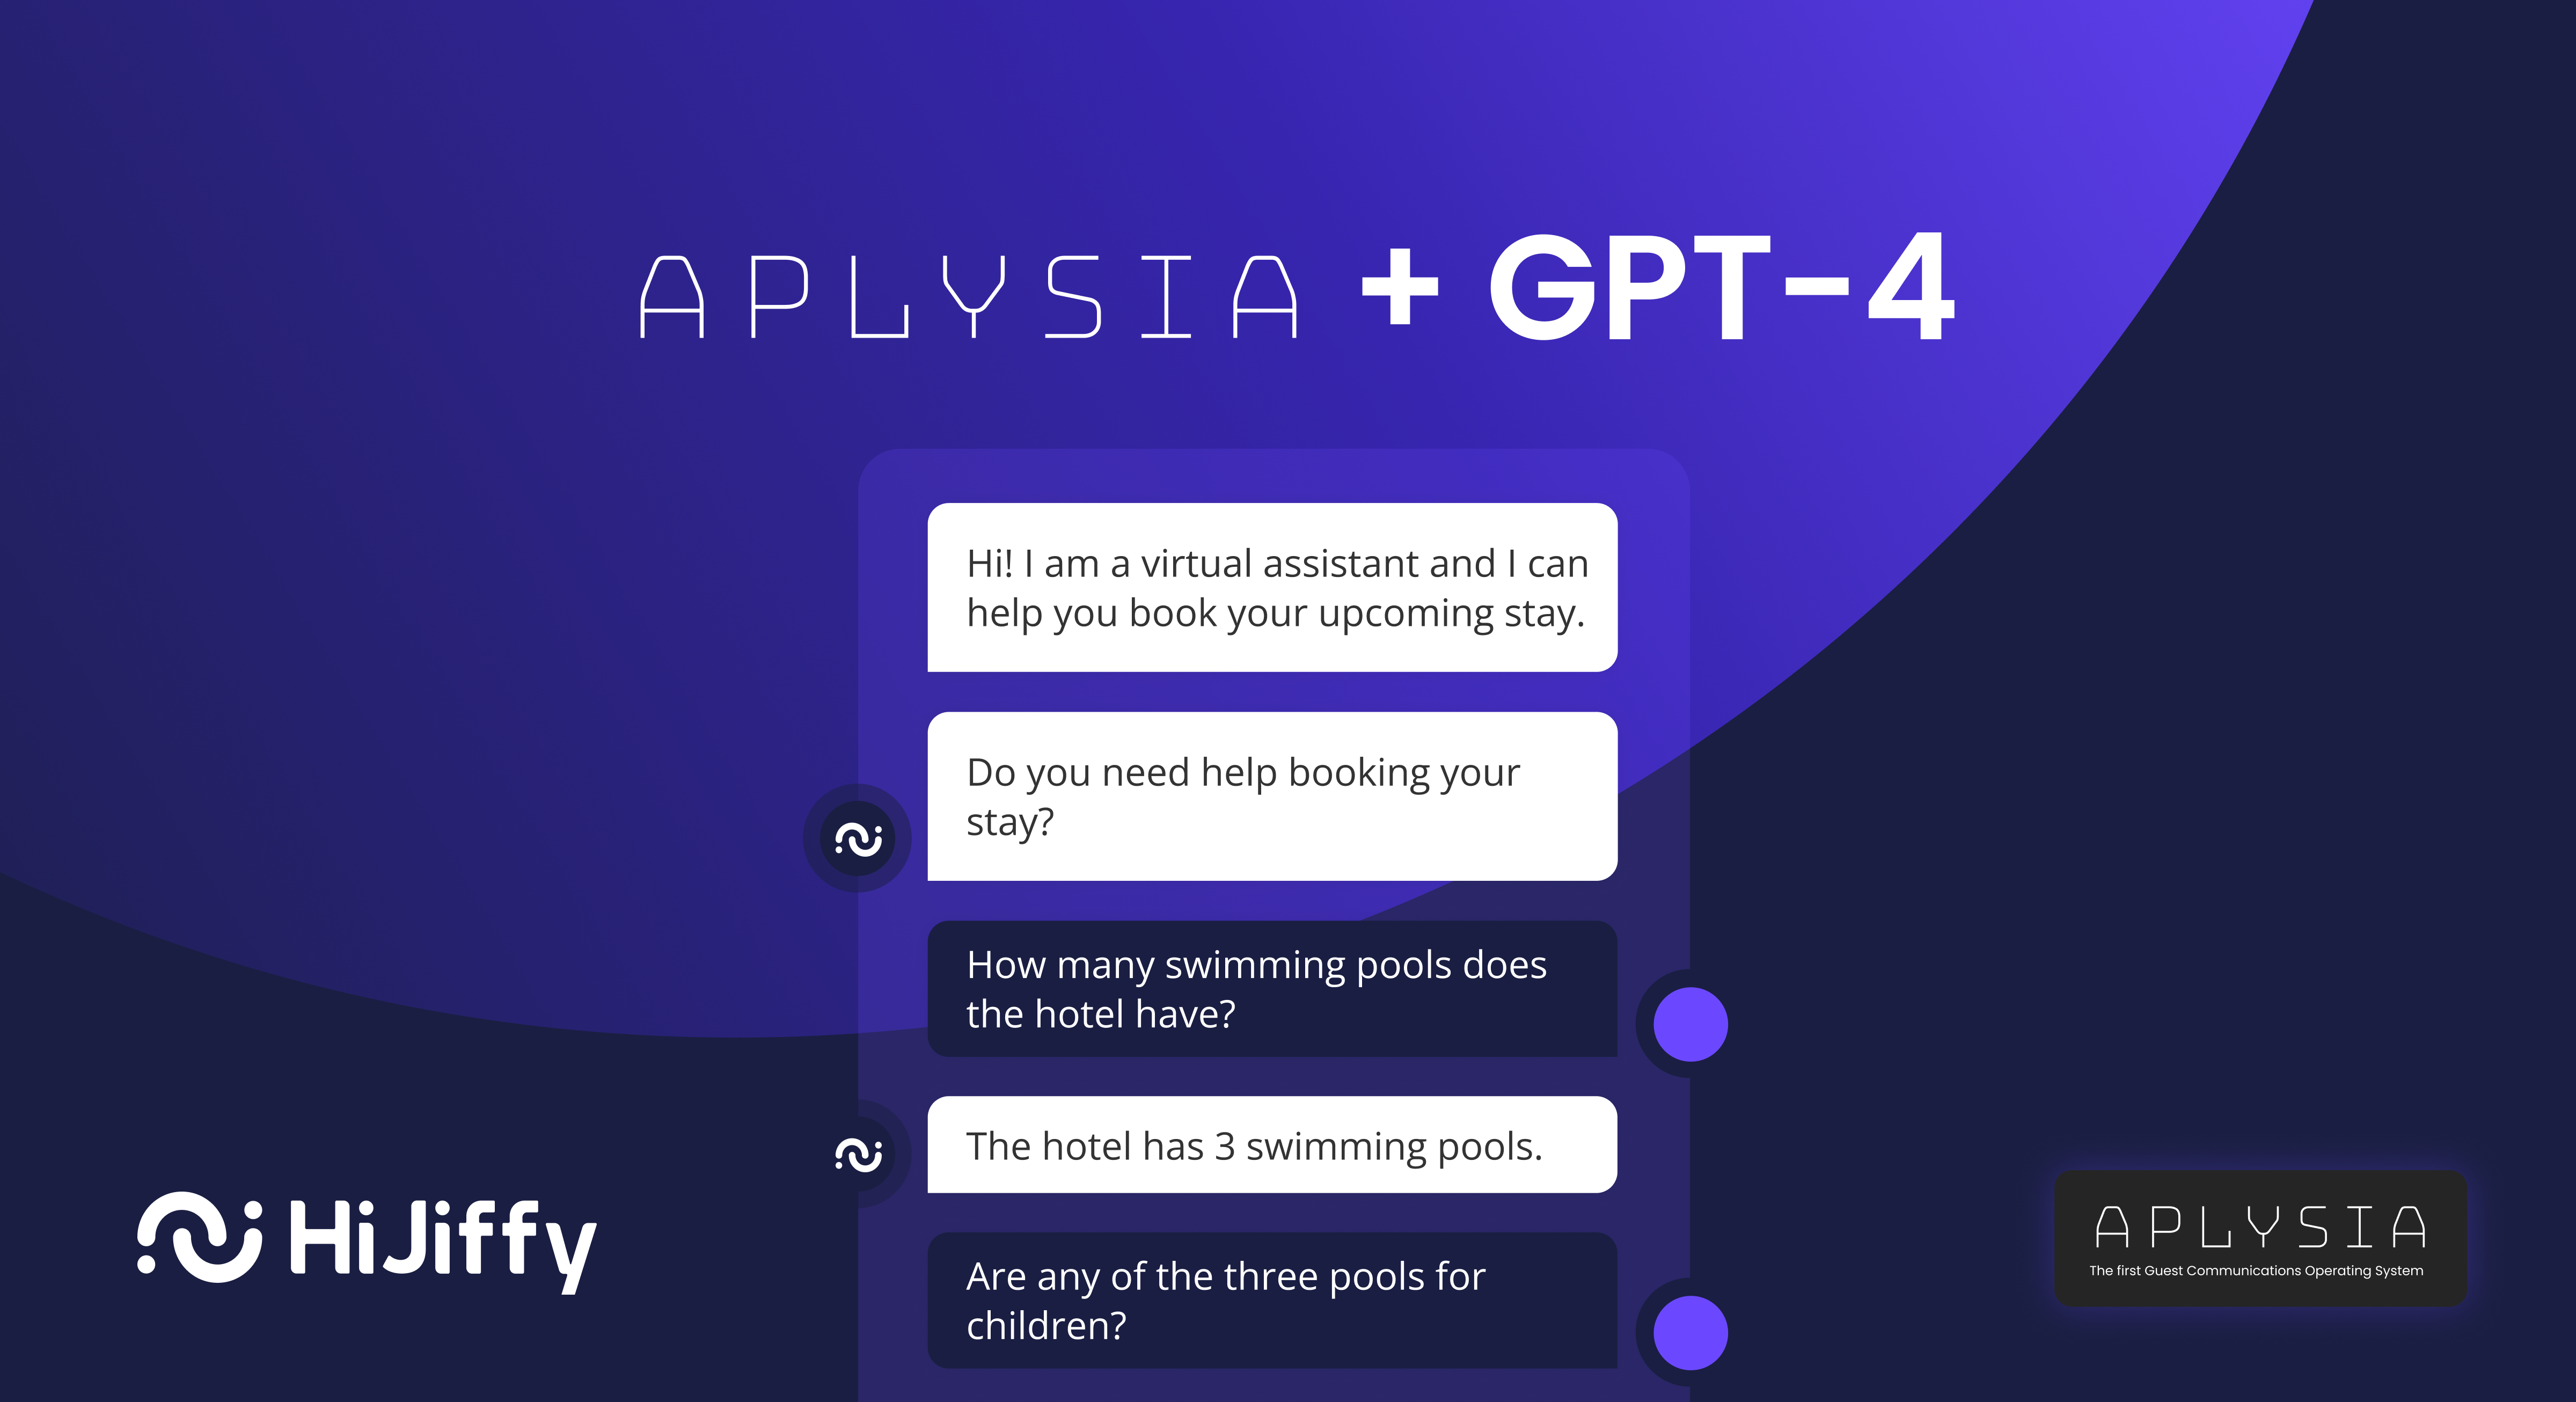 Explained: How the new version of Aplysia uses GPT